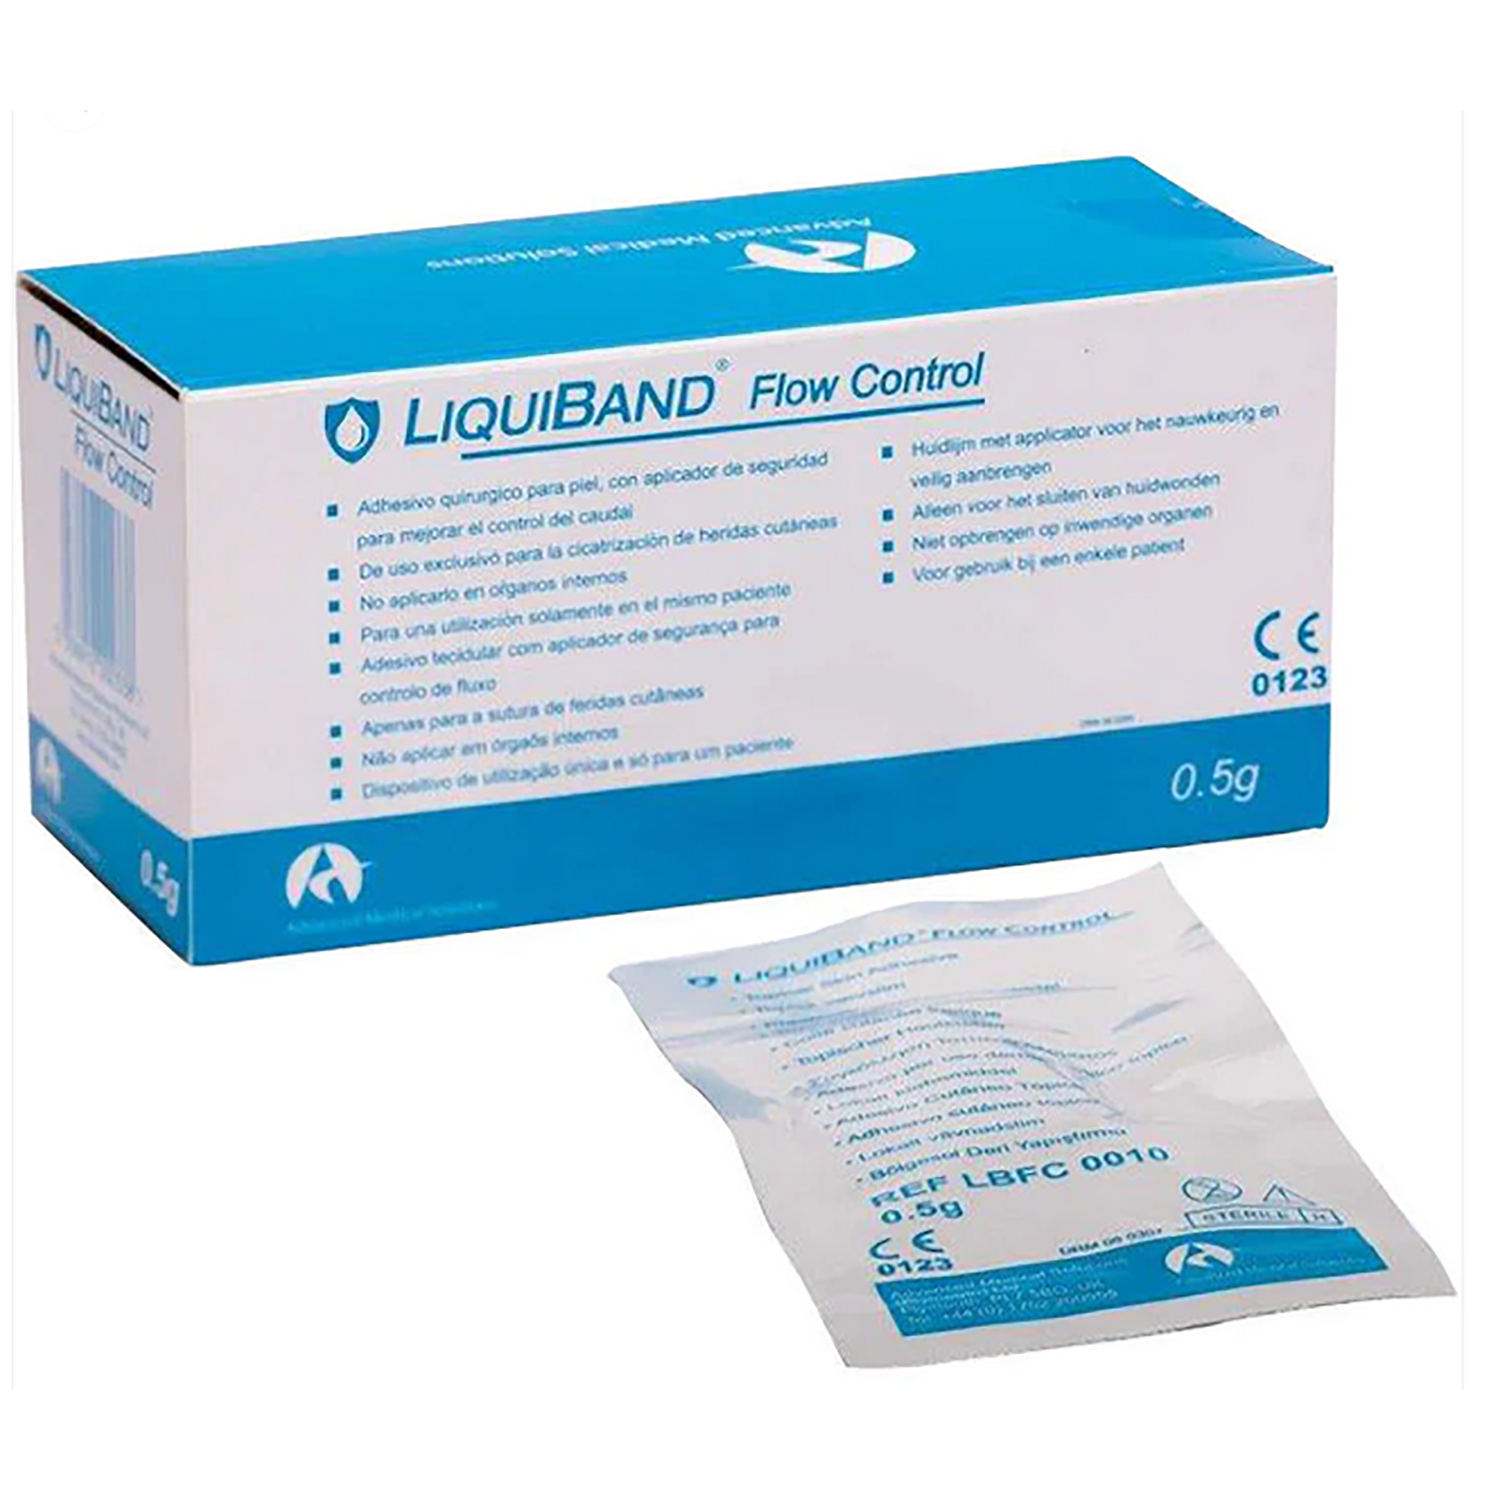 LiquiBand Flow Control | Tissue Adhesive | 0.5g | Pack of 10 (1)